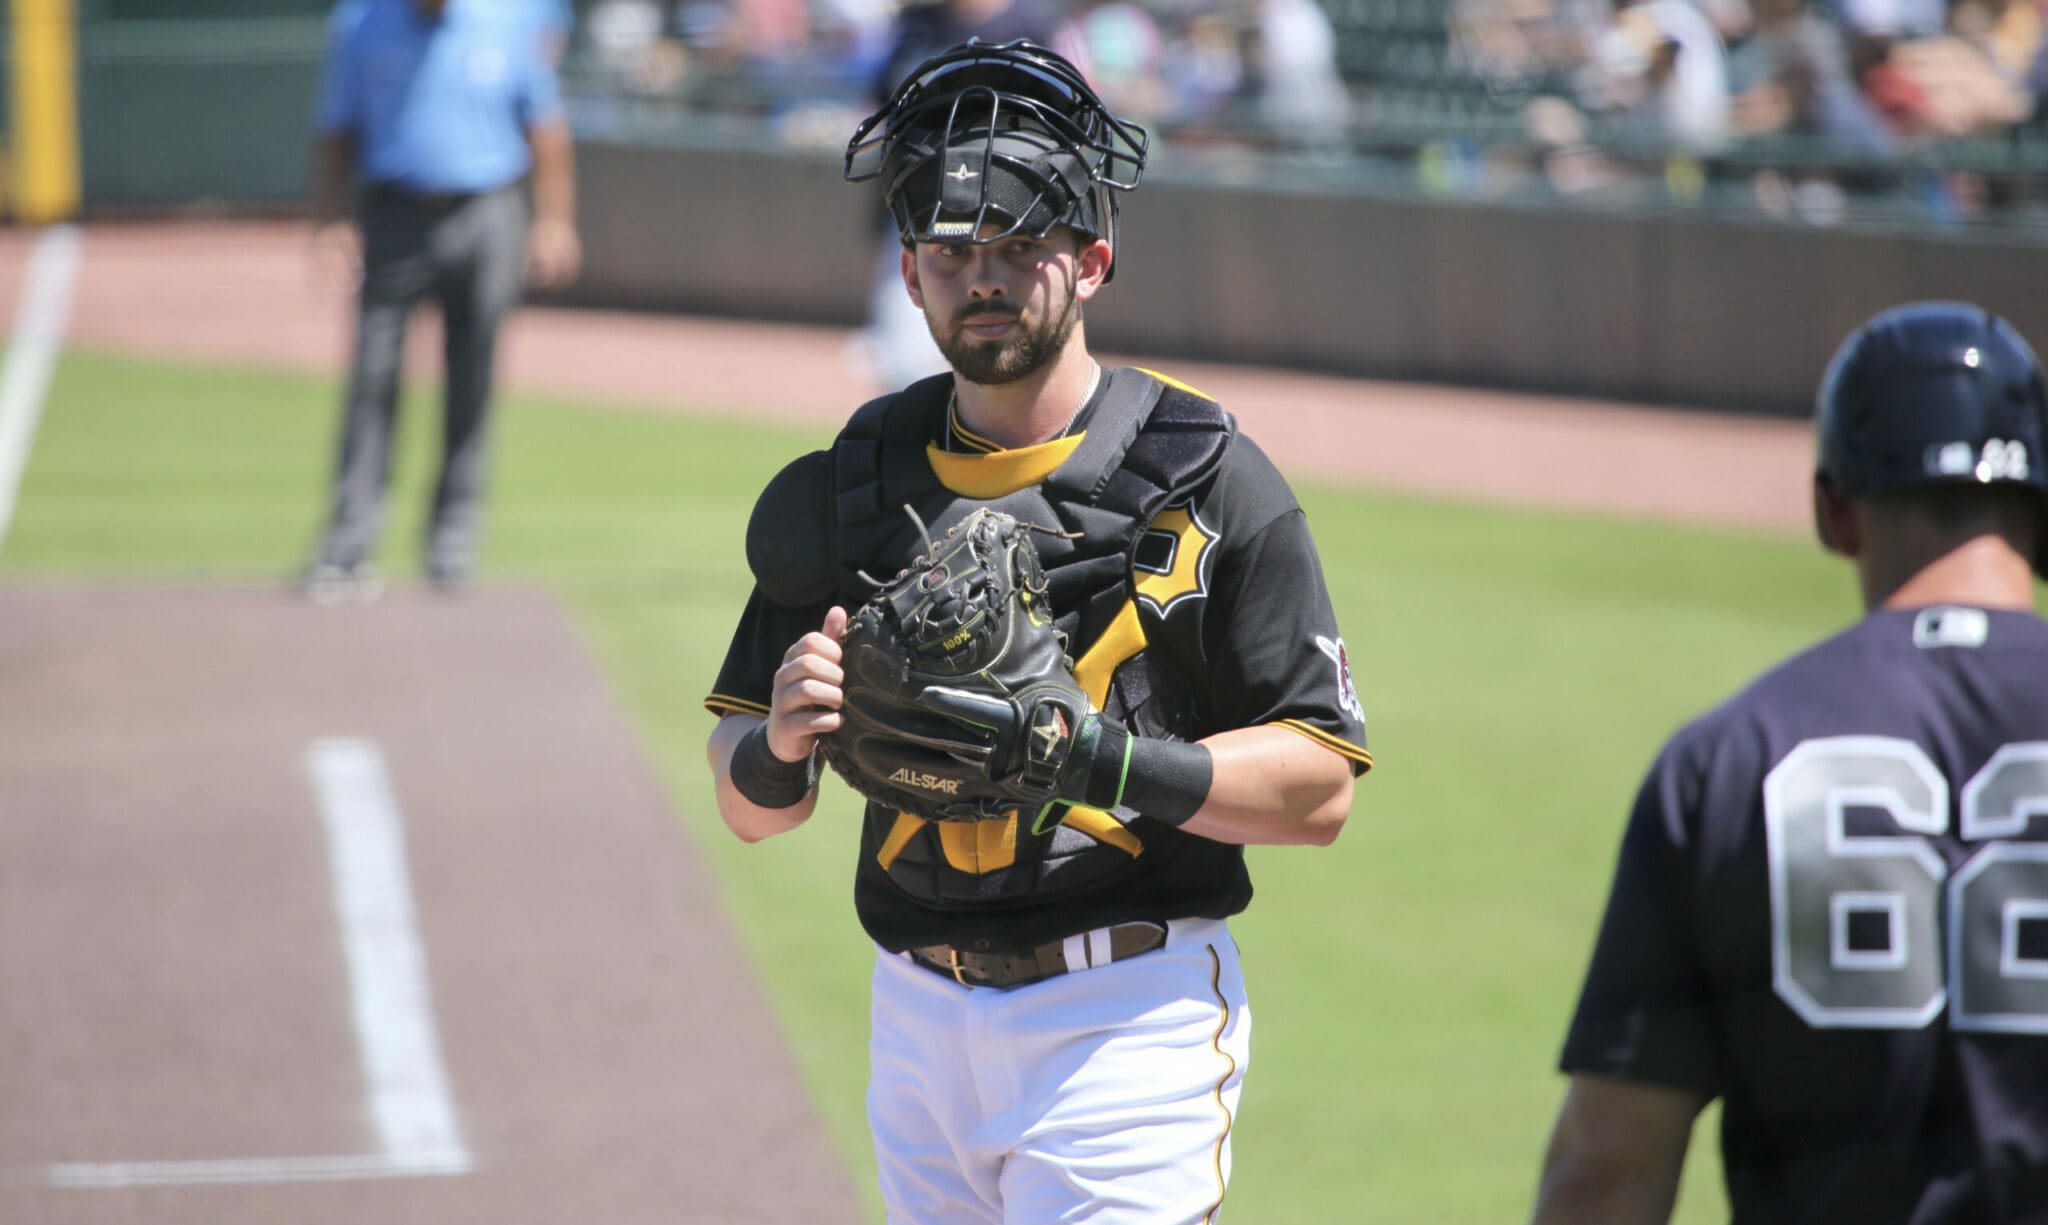 Pittsburgh Pirates Prospects-Carter Bins